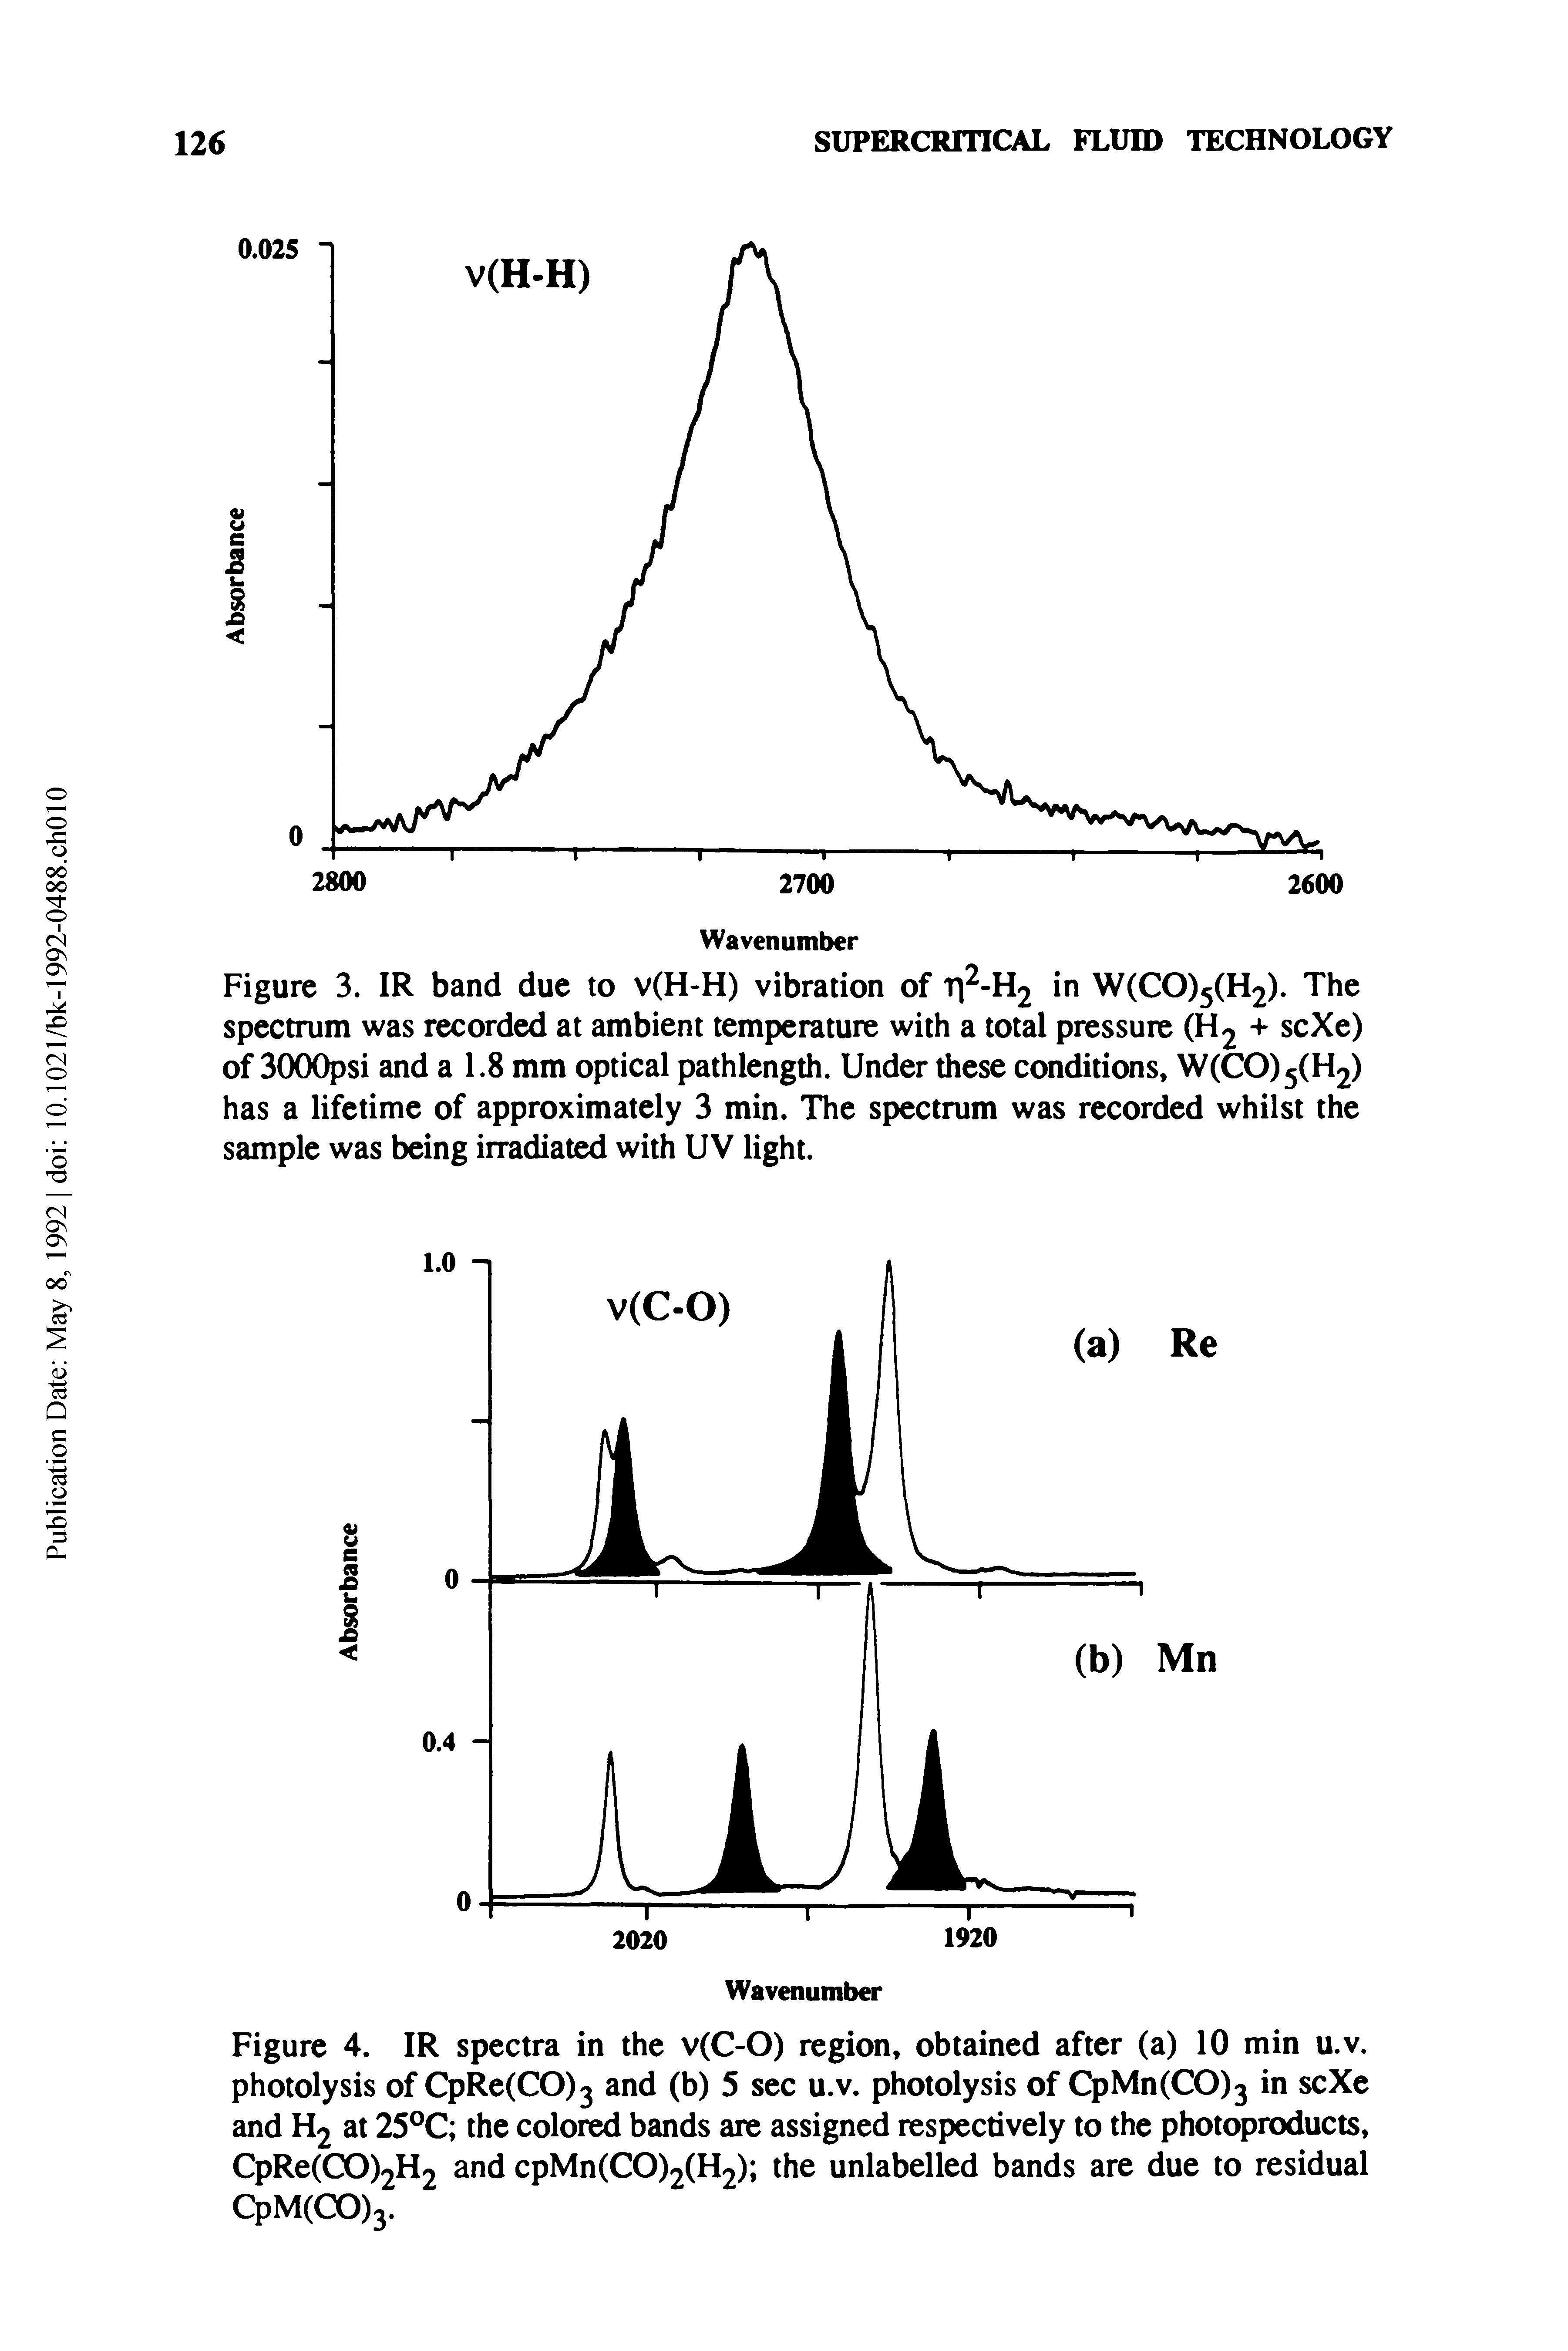 Figure 3. IR band due to v(H-H) vibration of T 2-H2 in W(CO)5(H2). The spectrum was recorded at ambient temperature with a total pressure (H2 + scXe) of 3000psi and a 1.8 mm optical pathlength. Under these conditions, W(CO)5(H2) has a lifetime of approximately 3 min. The spectrum was recorded whilst the sample was being irradiated with UV light.